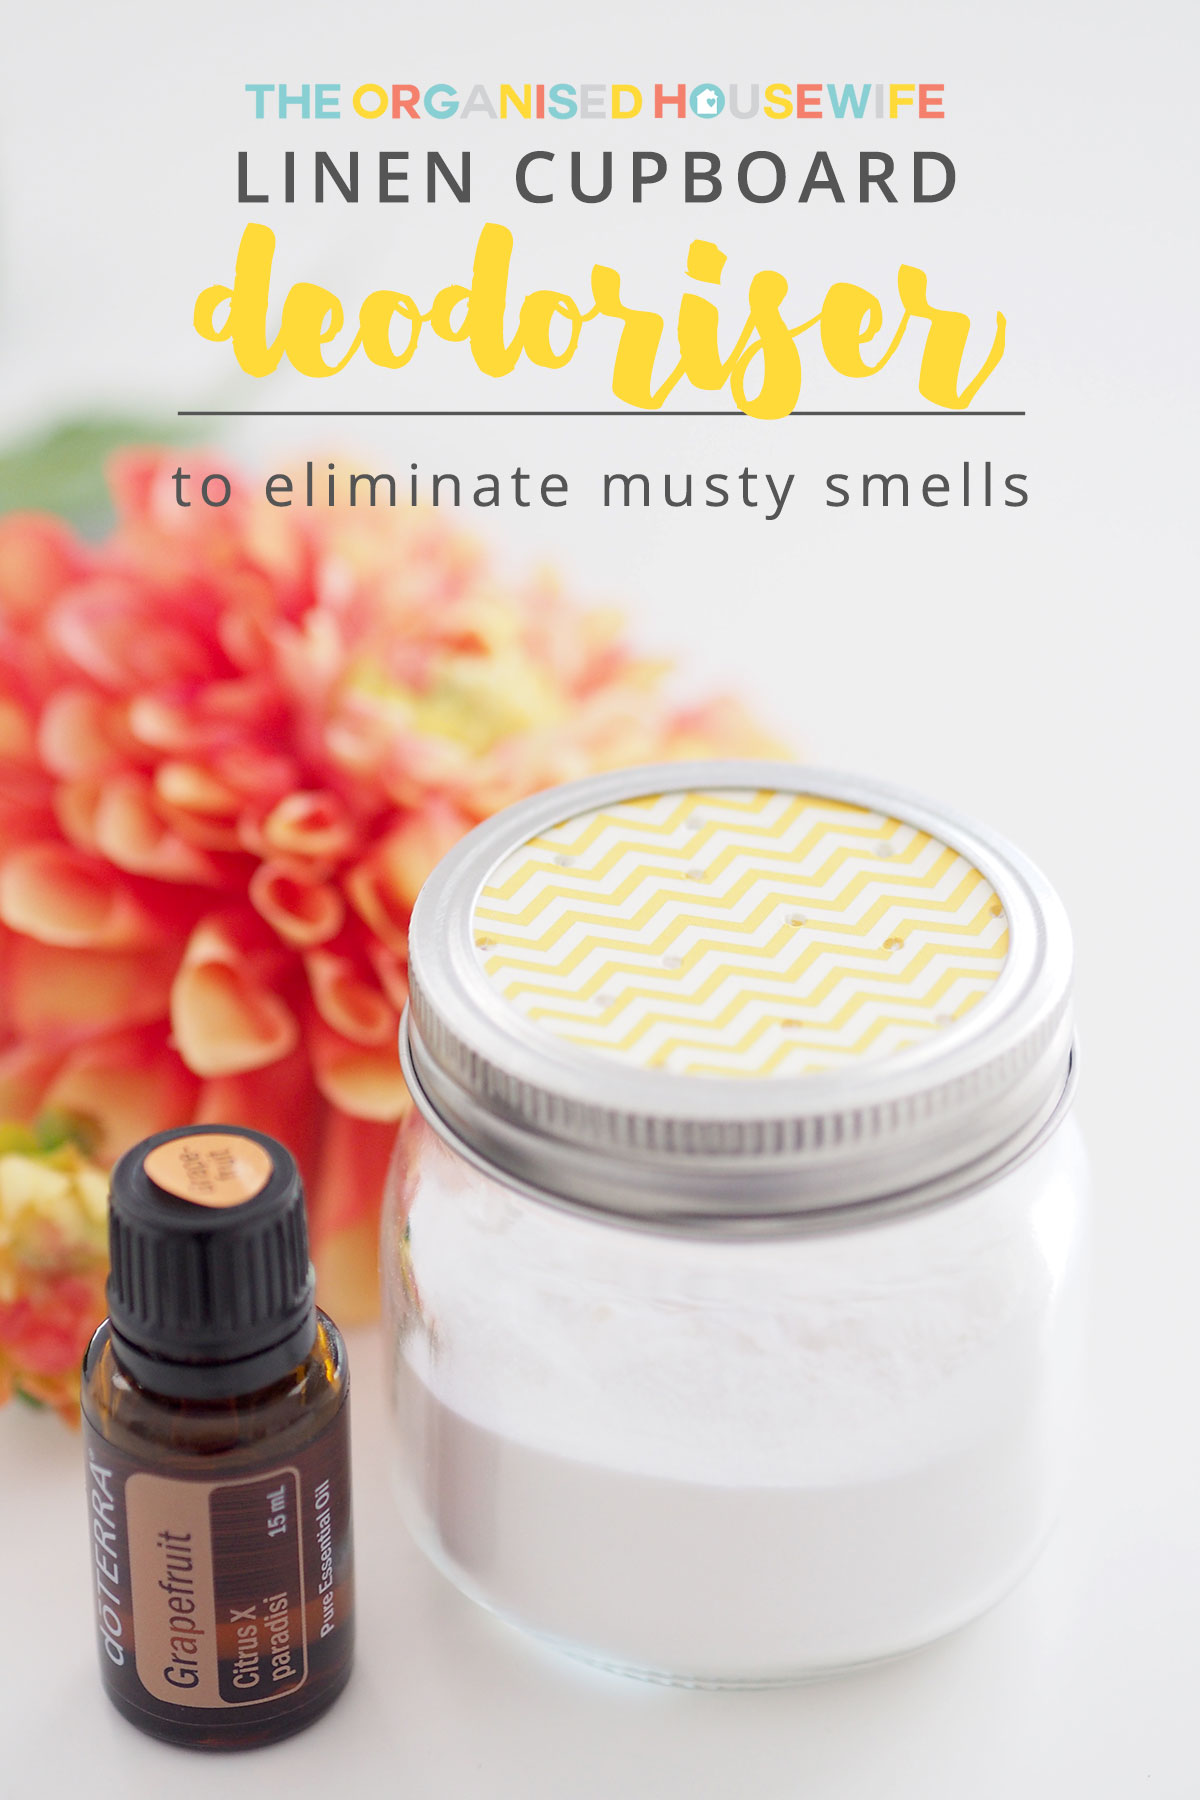 Depending on where you live and how you wash your clothes, the linen cupboard can become a little musty and your bedsheets, towels, etc. can stop smelling fresh. Here is my Linen Cupboard Deodoriser that will help to eliminate the musty smell.